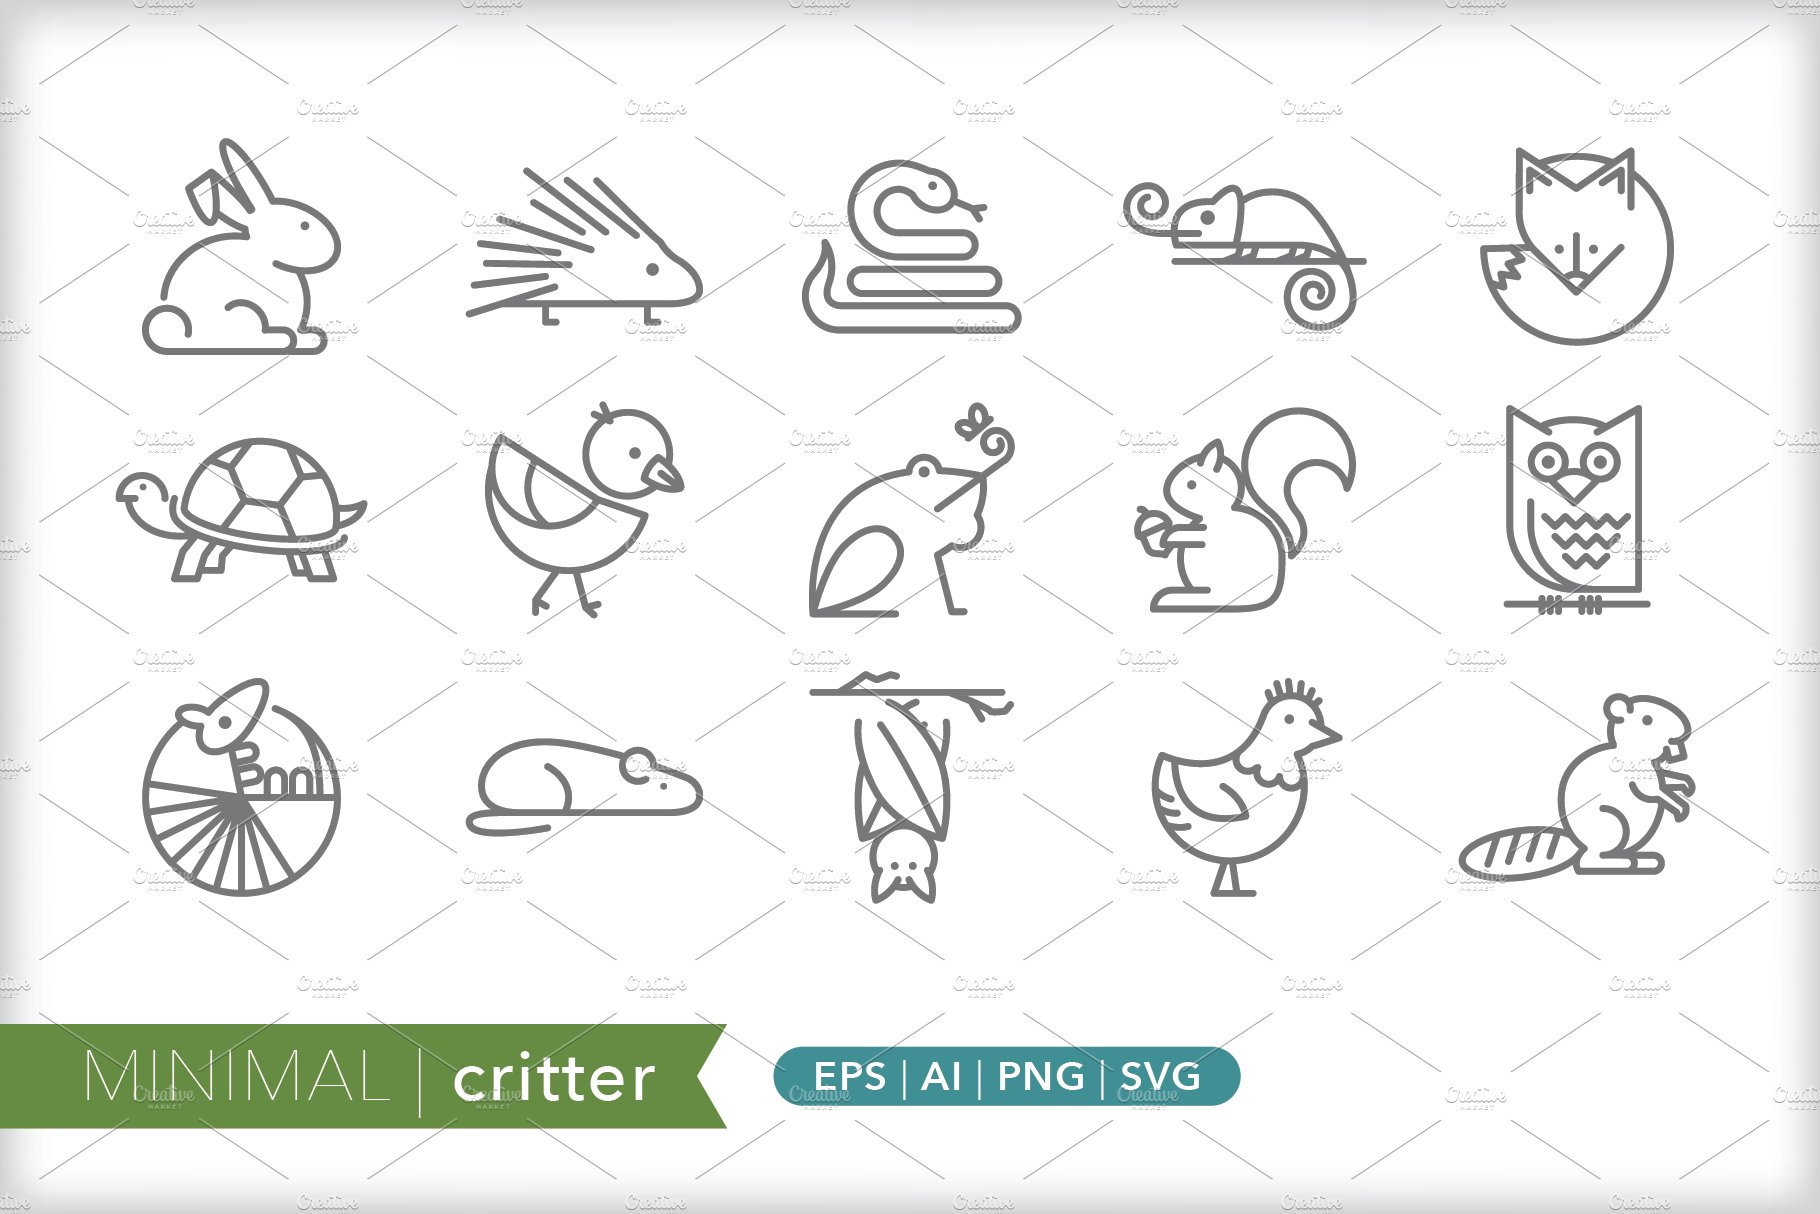 Minimal critter icons cover image.